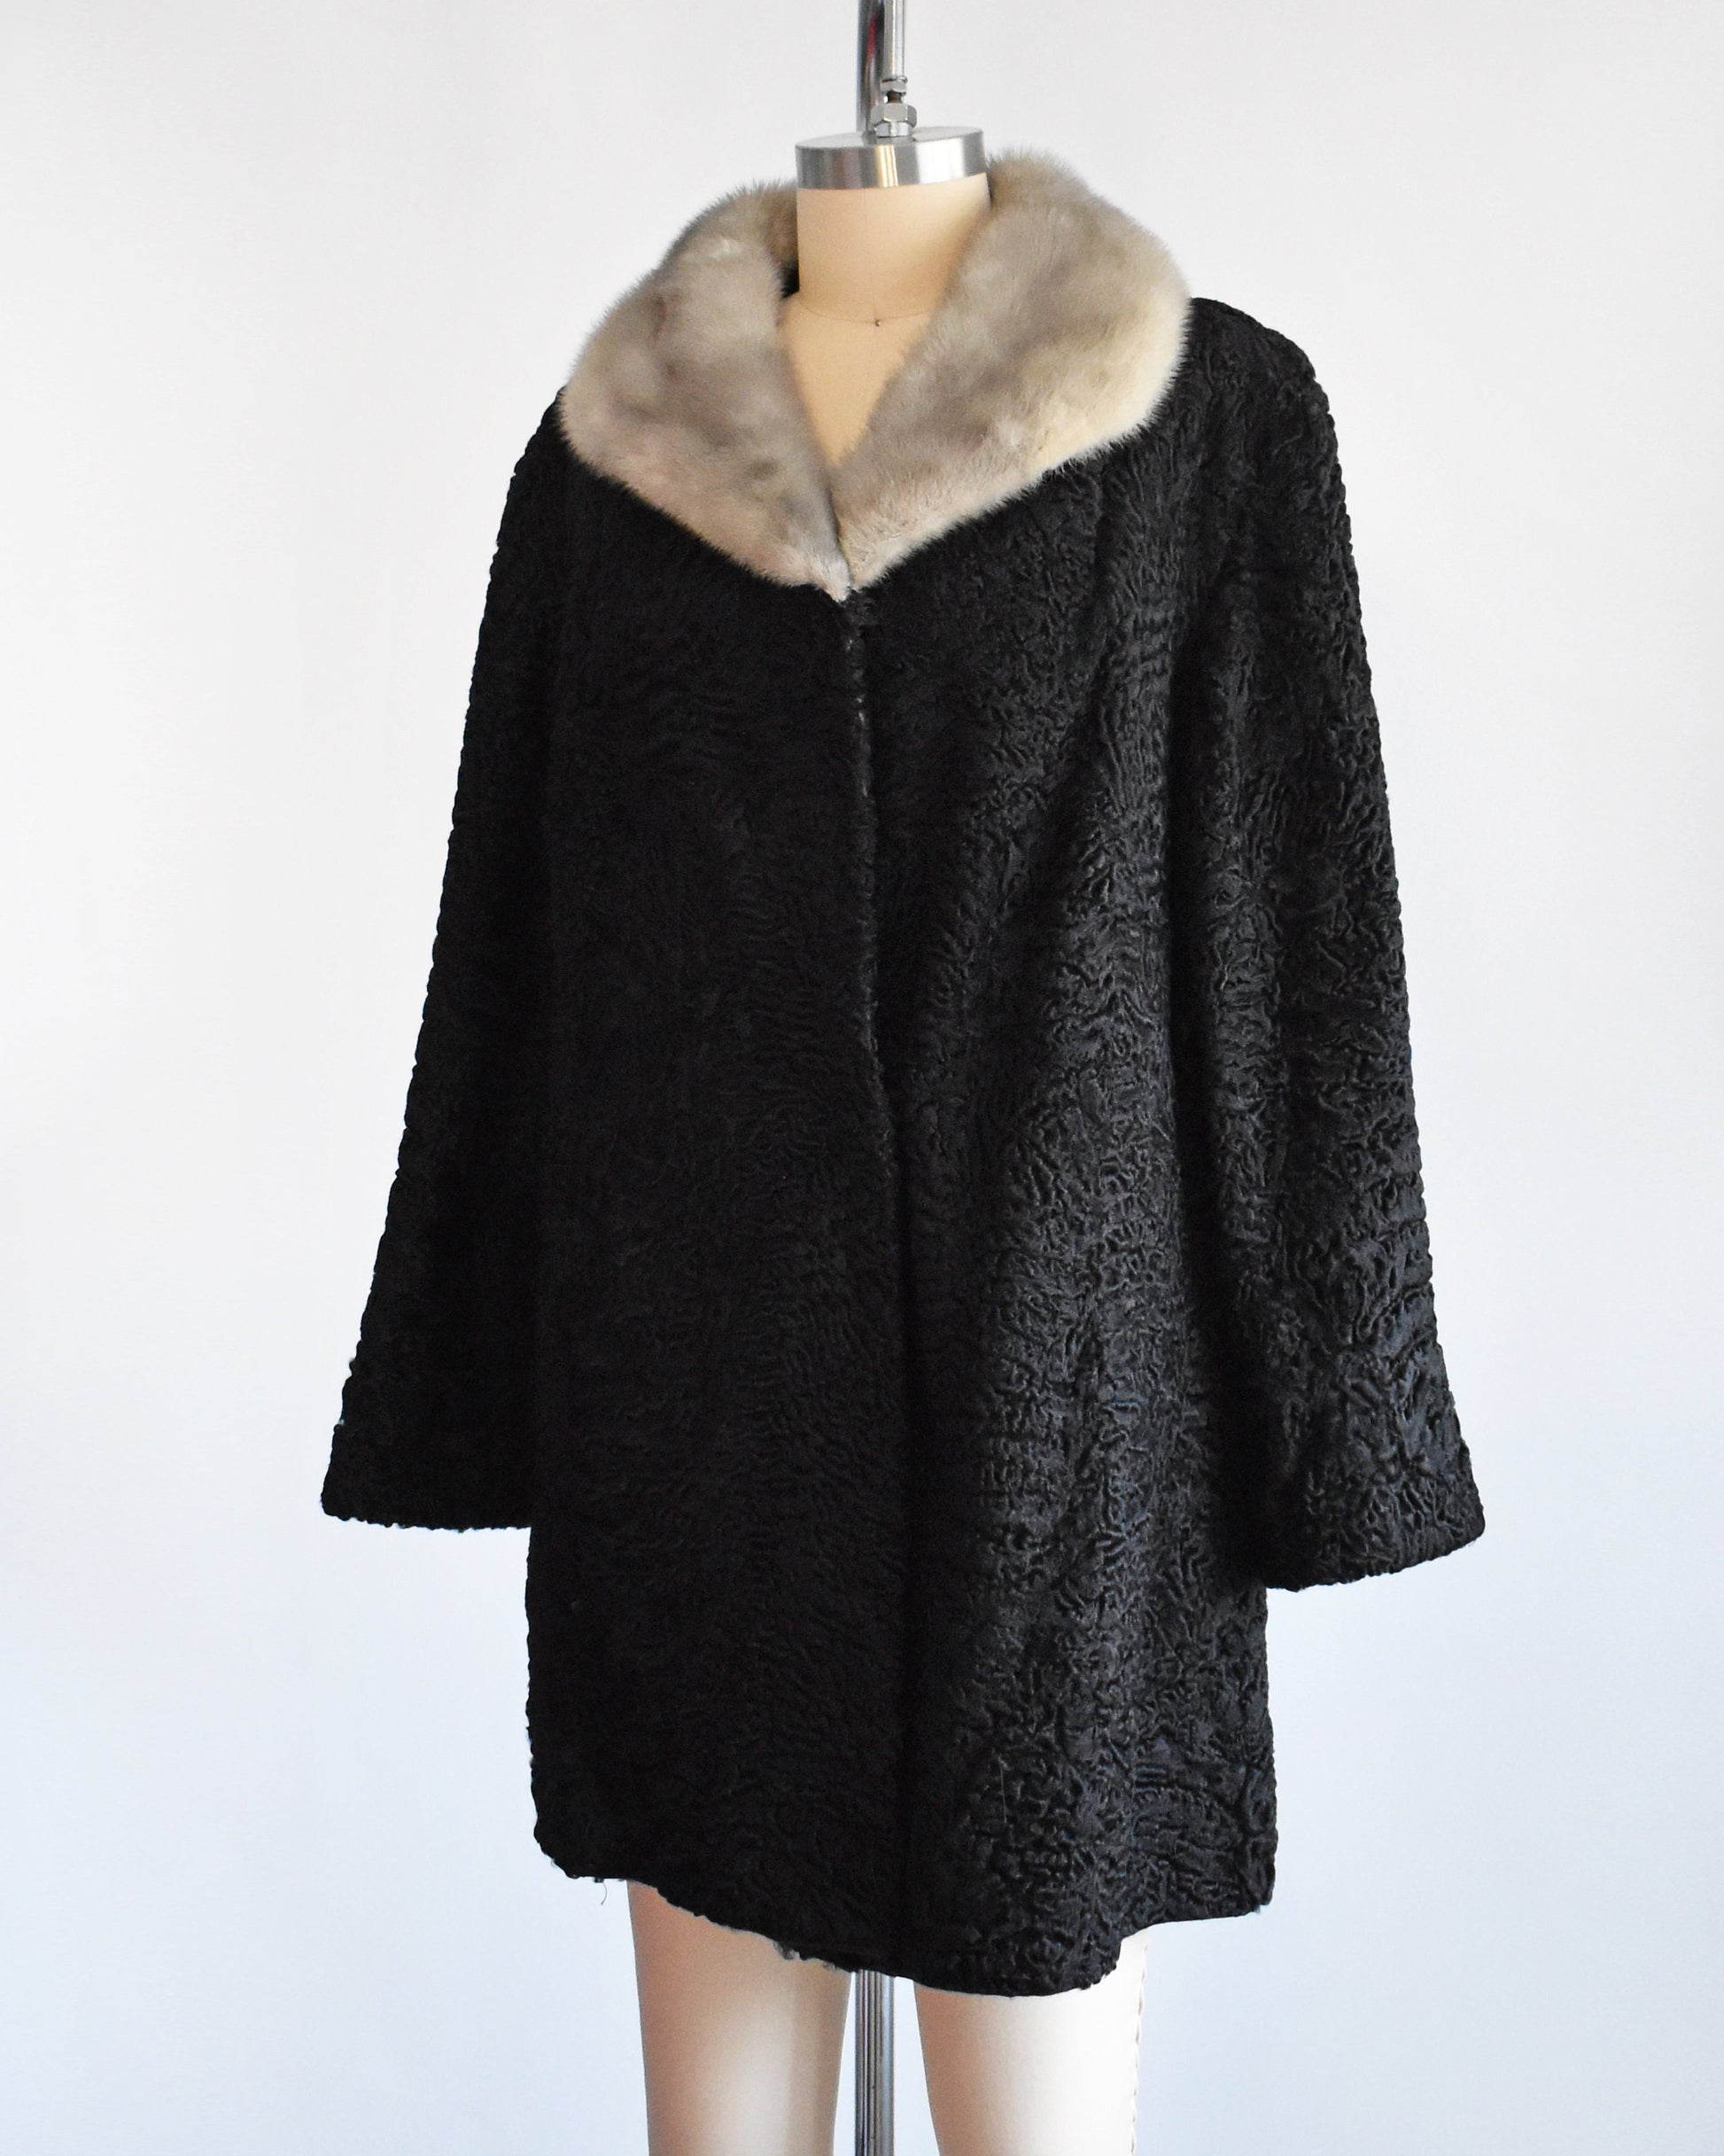 Side front view of a vintage late 50s early 60s black curly Persian lamb coat that has a silver gray mink fur collar. Two hidden hook and eye closures down the front. Coat is on a dress form.